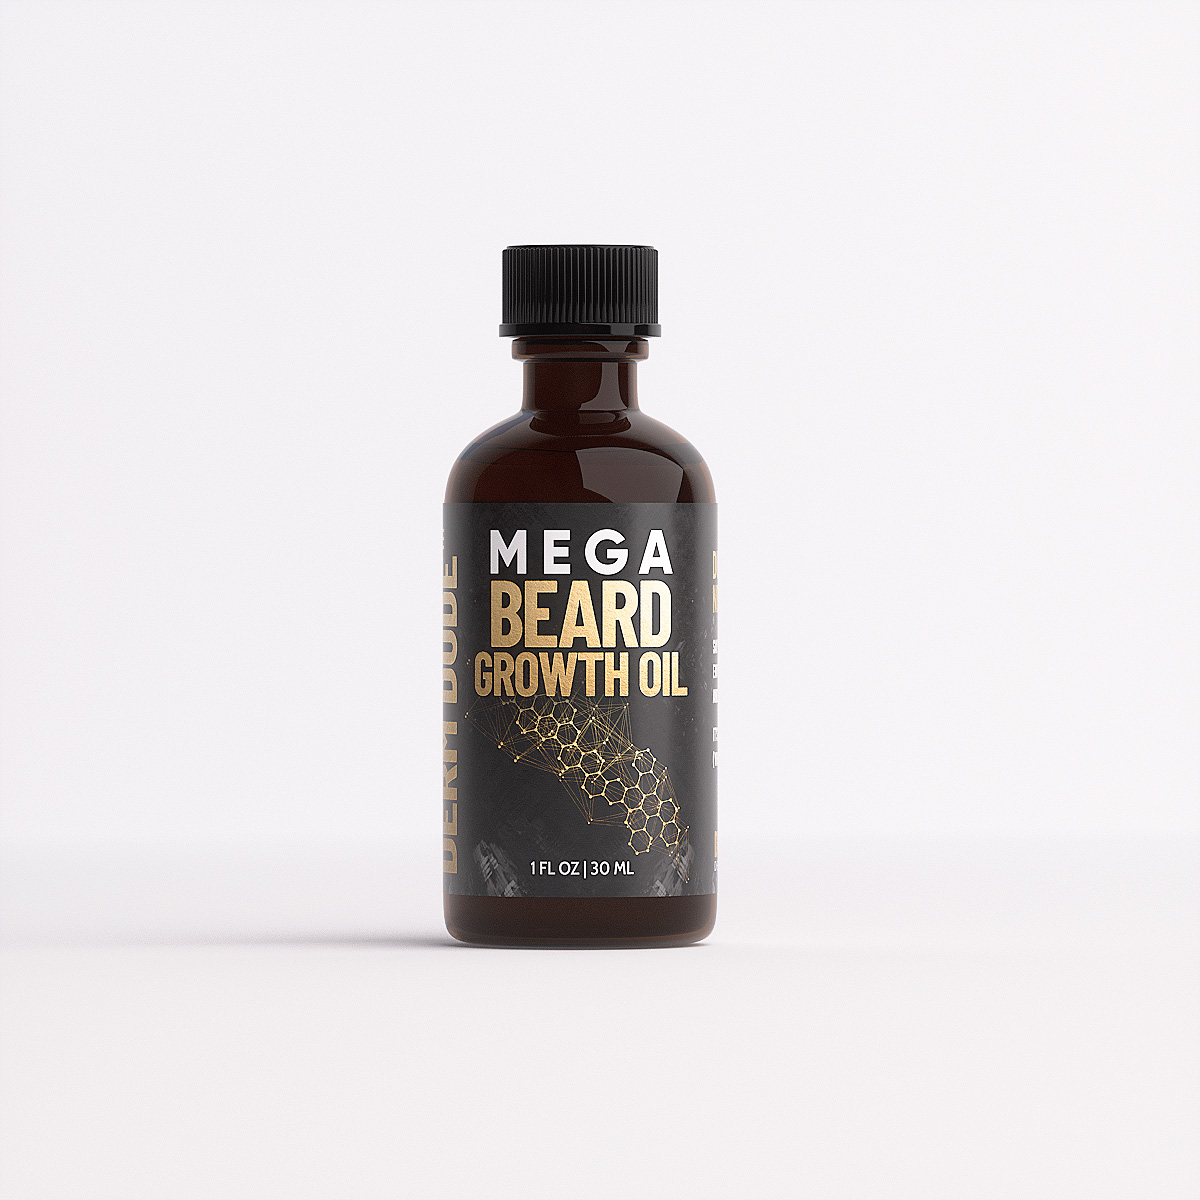 Mega Beard Growth Oil helps with patchy spots